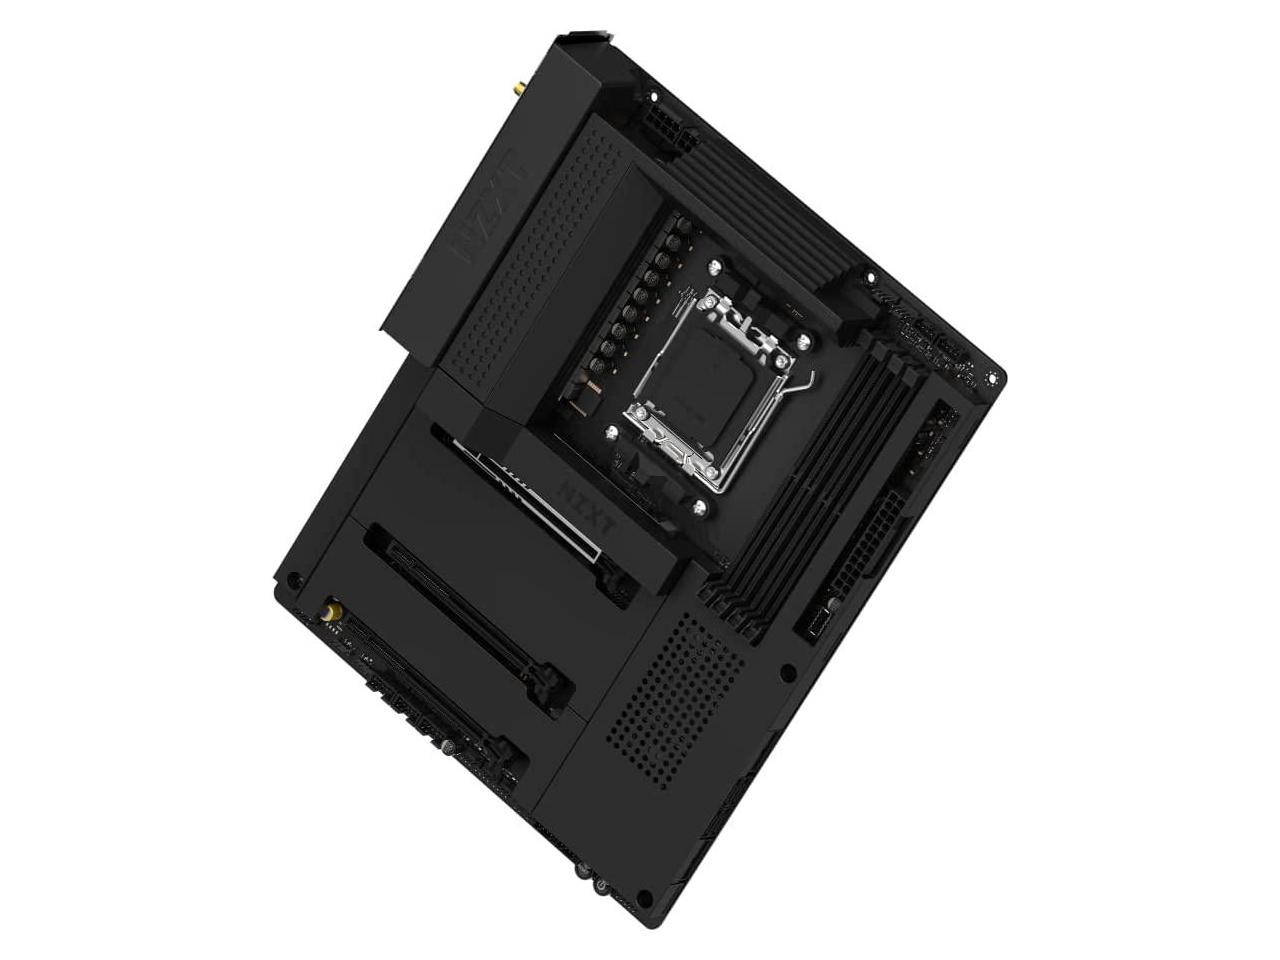 NZXT N7 B650 - N7-B65XT-B1 - AMD B650 chipset (Supports AMD 7000 Series CPUs) - ATX Gaming Motherboard - Integrated Rear I/O Shield - WiFi 6 connectivity - Black - image 5 of 16